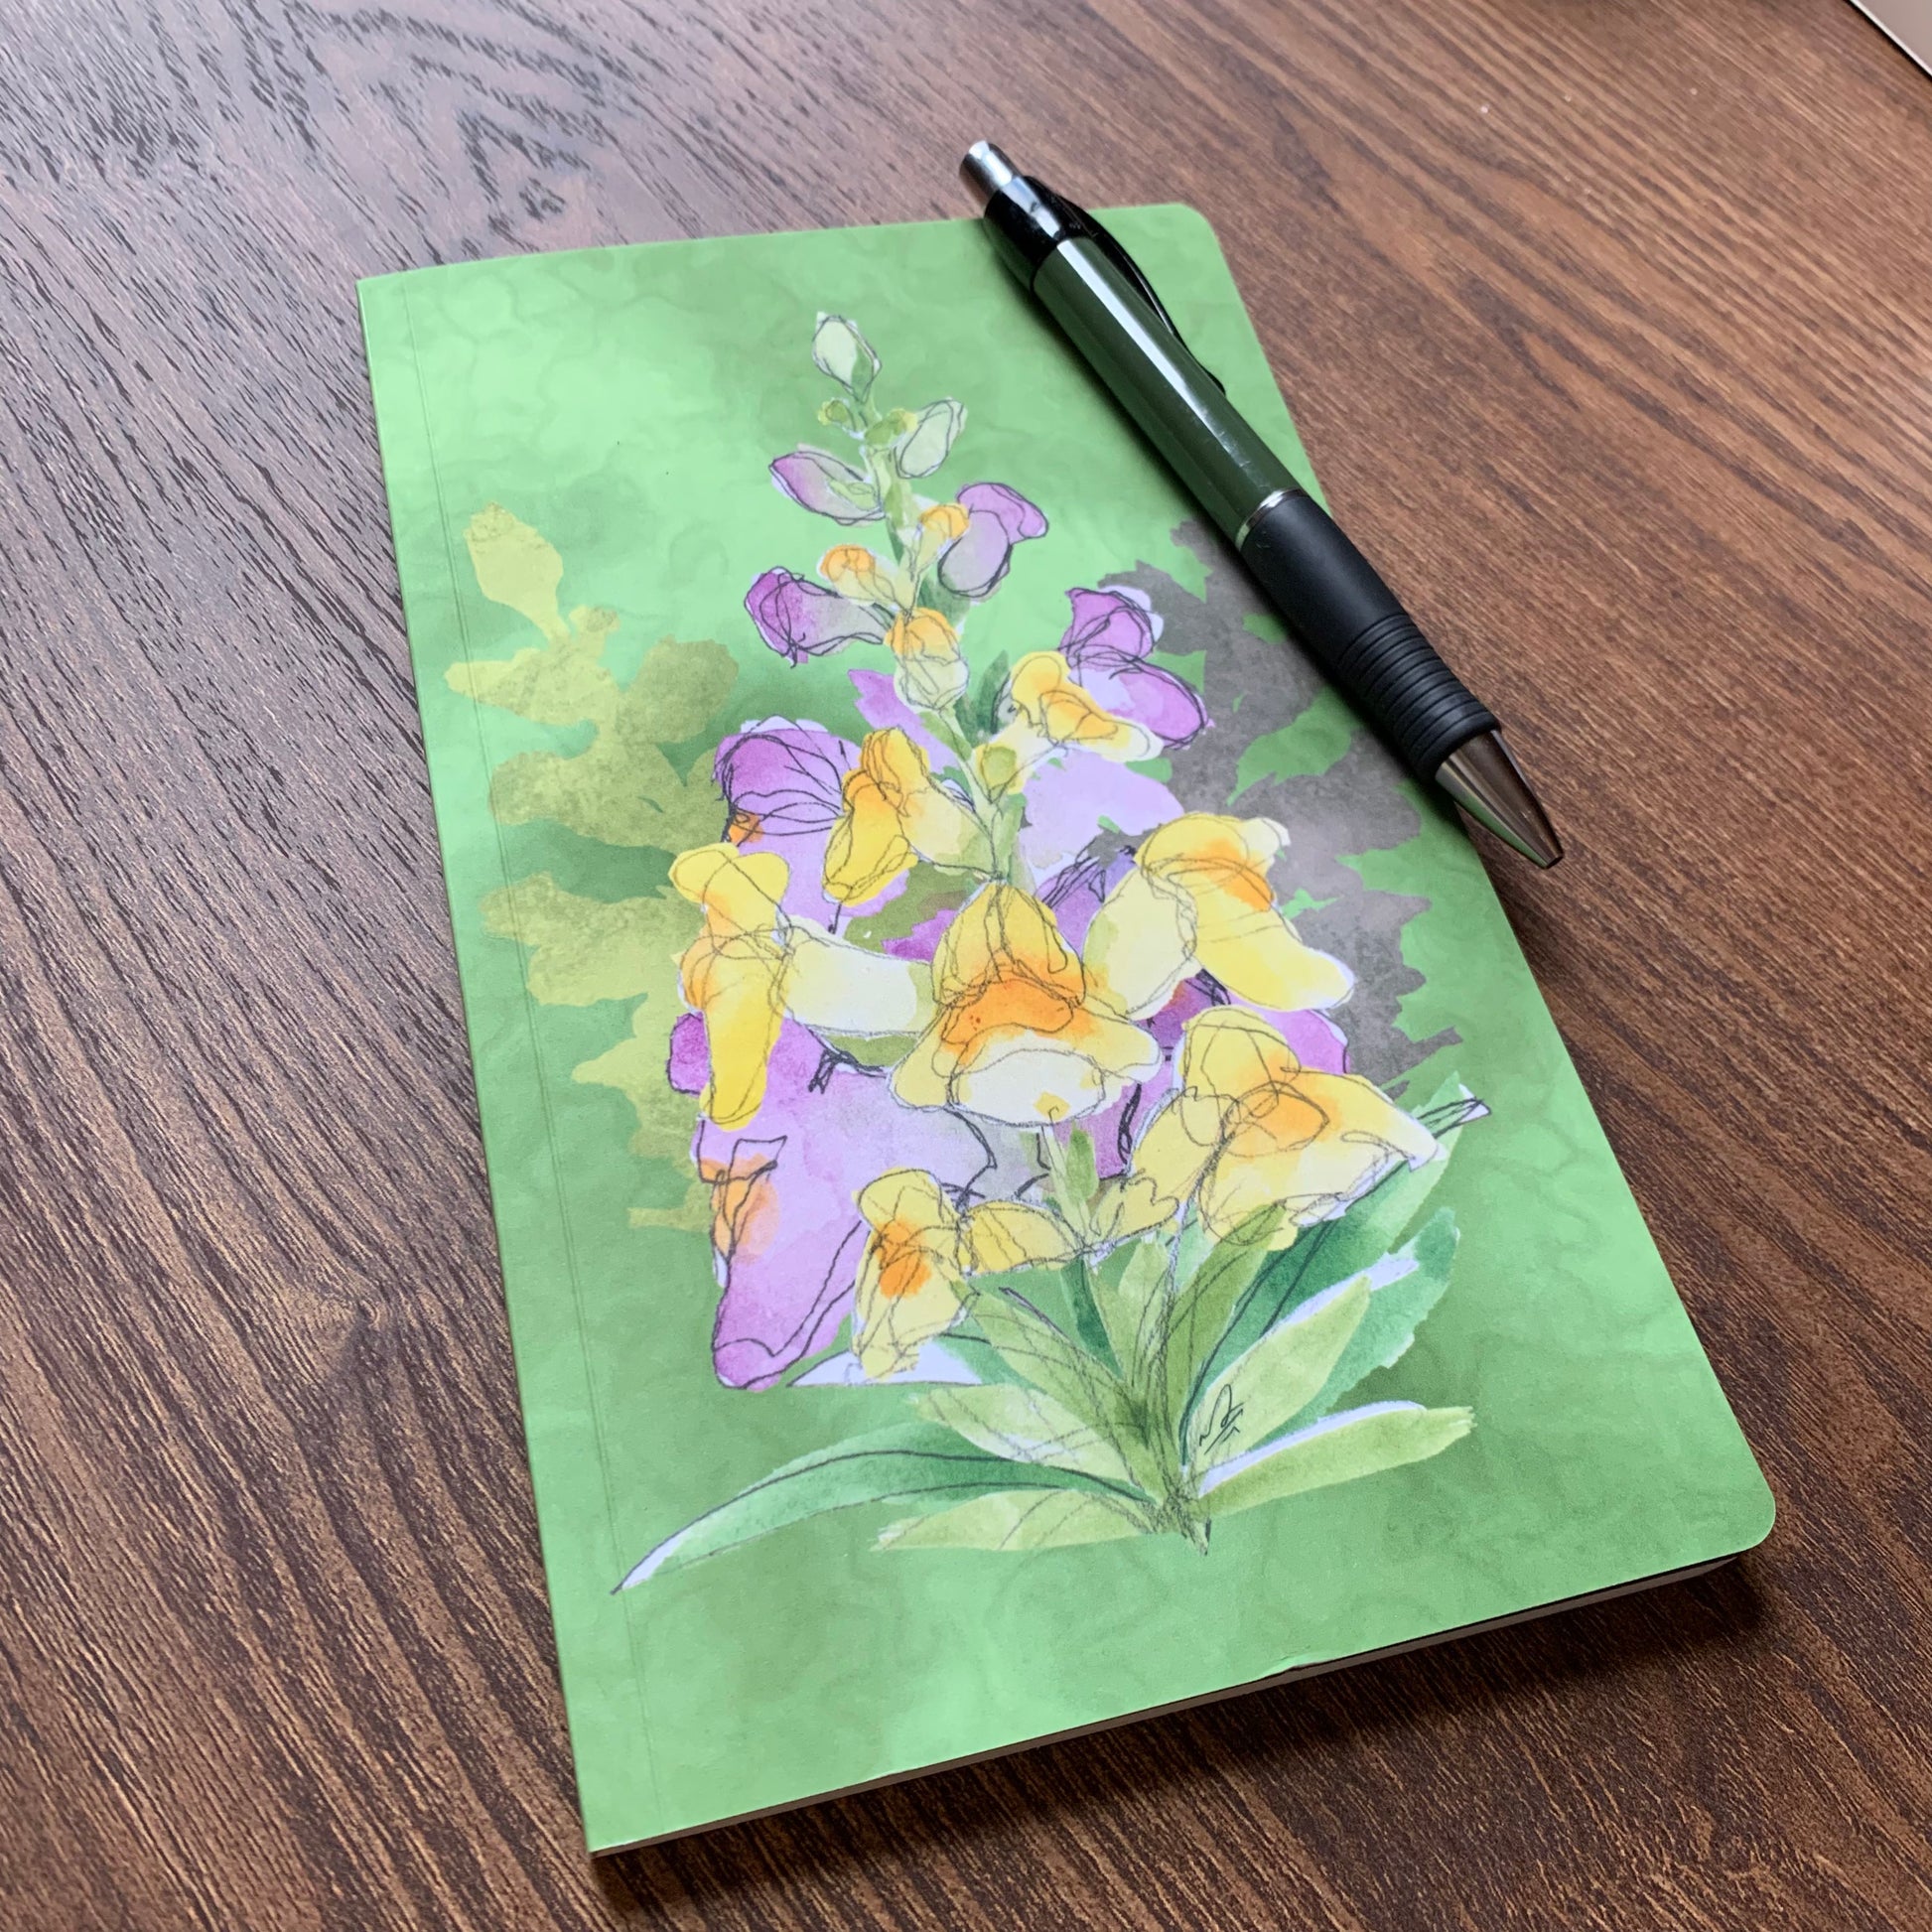 Snapdragon Journal – Made by Misha